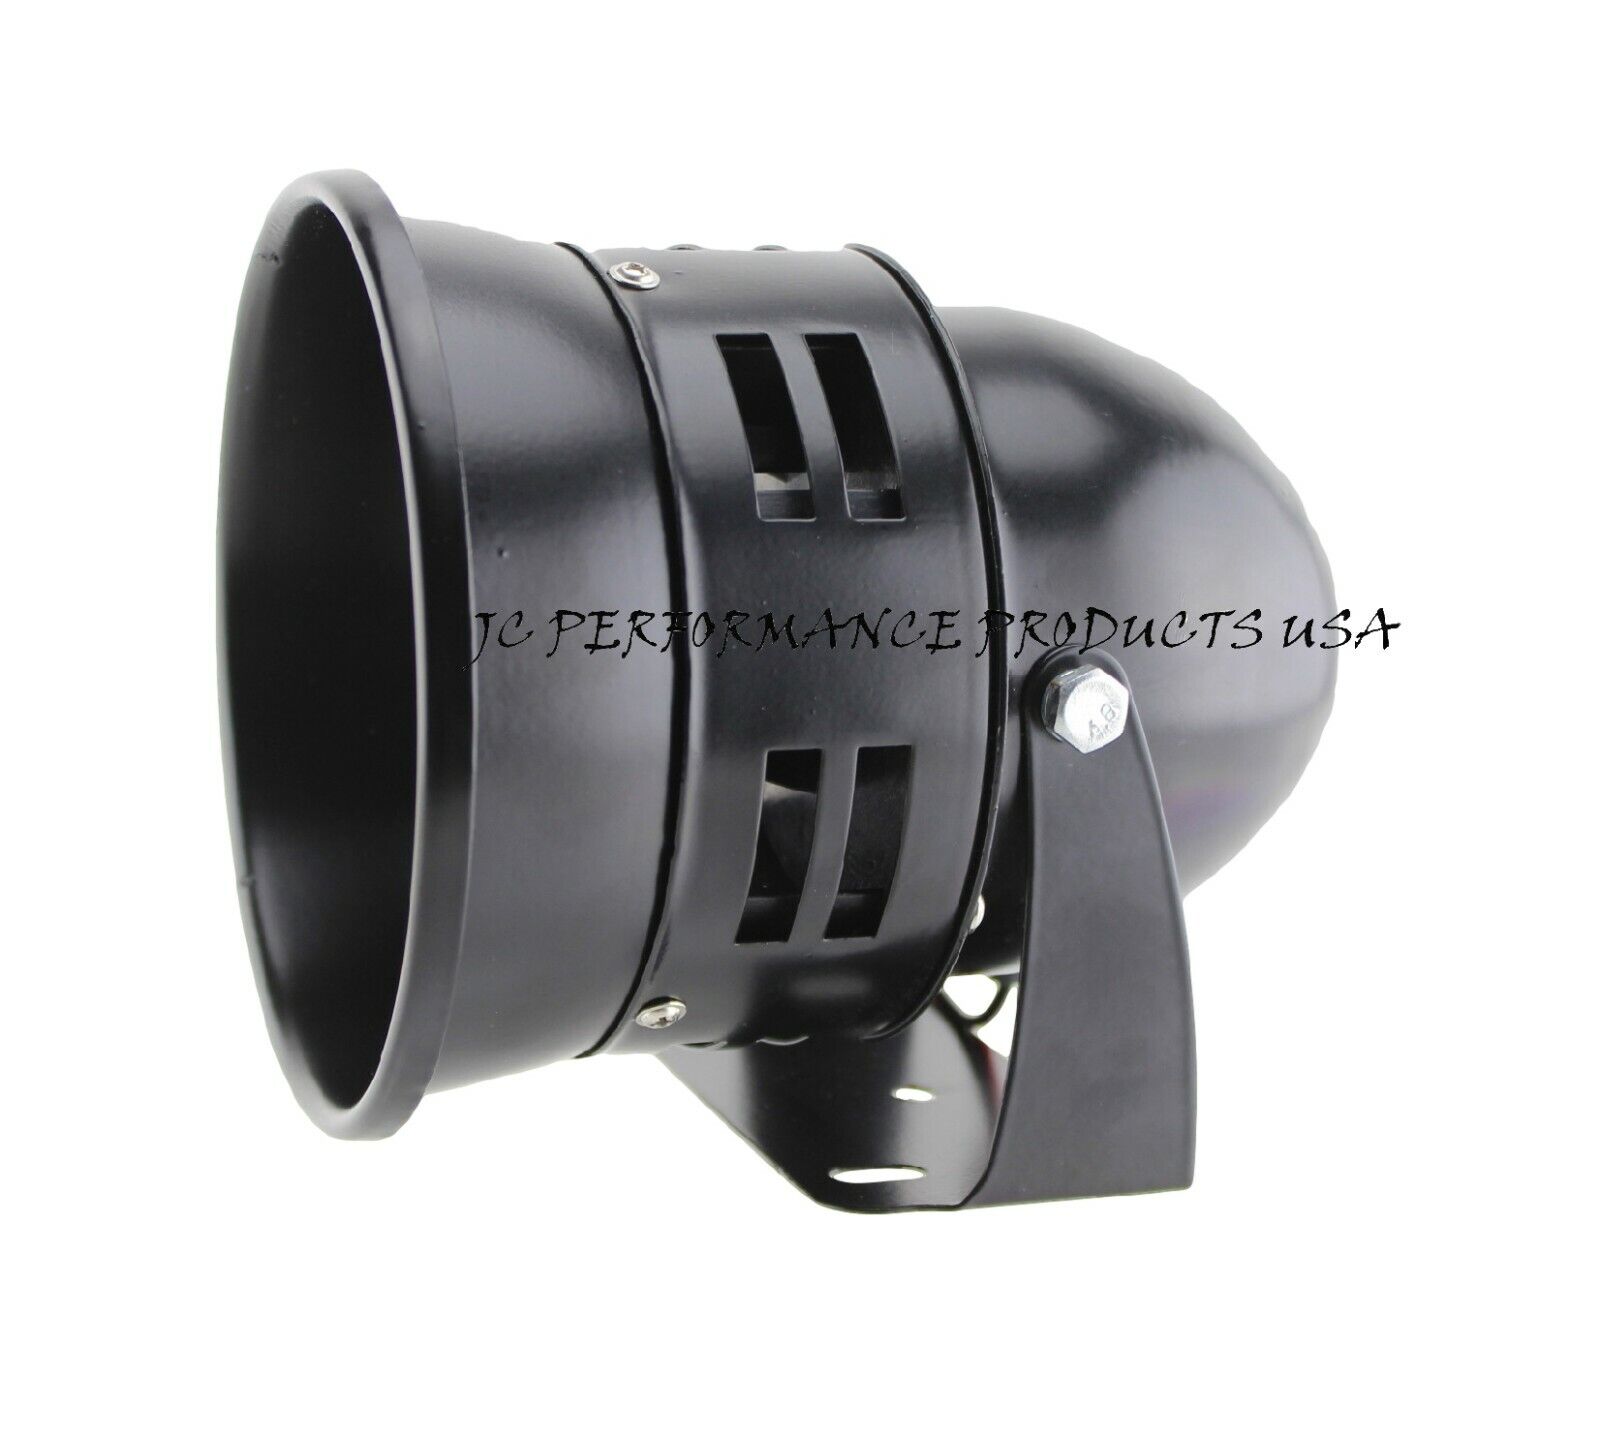 BLEMISHED CAR TRUCK MOTOR DRIVEN AIR RAID SIREN ALARM FIRE SECURITY RESCUE HORN